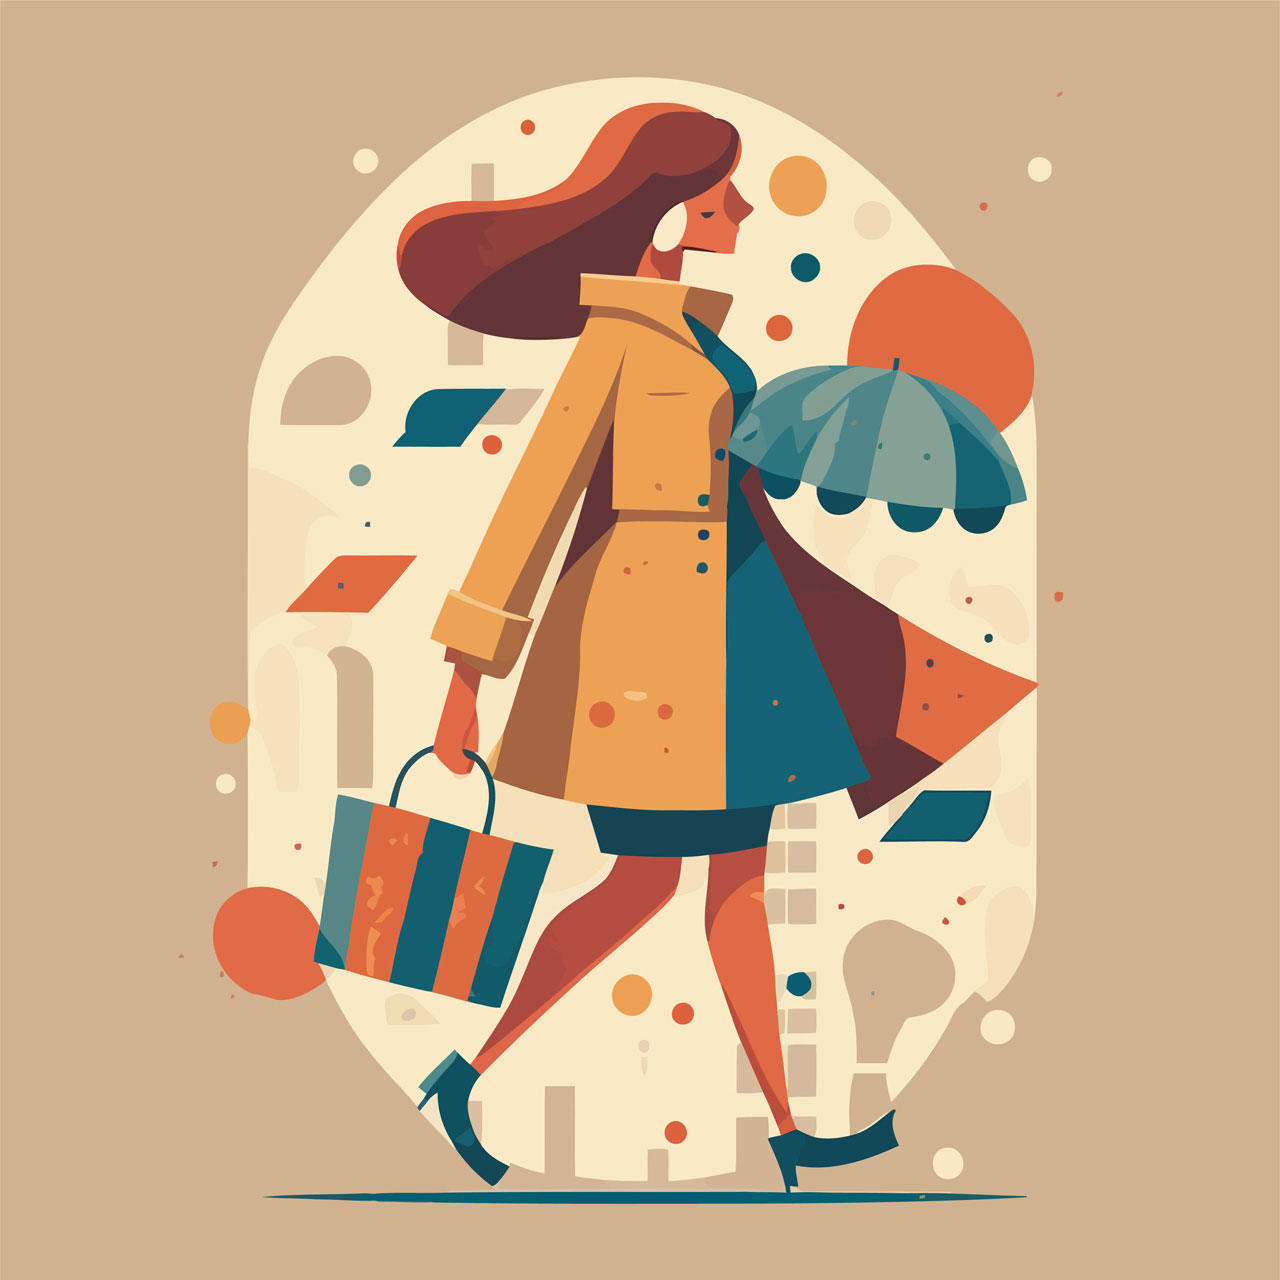 Fashionable woman shopping carrying bags concept cartoon image